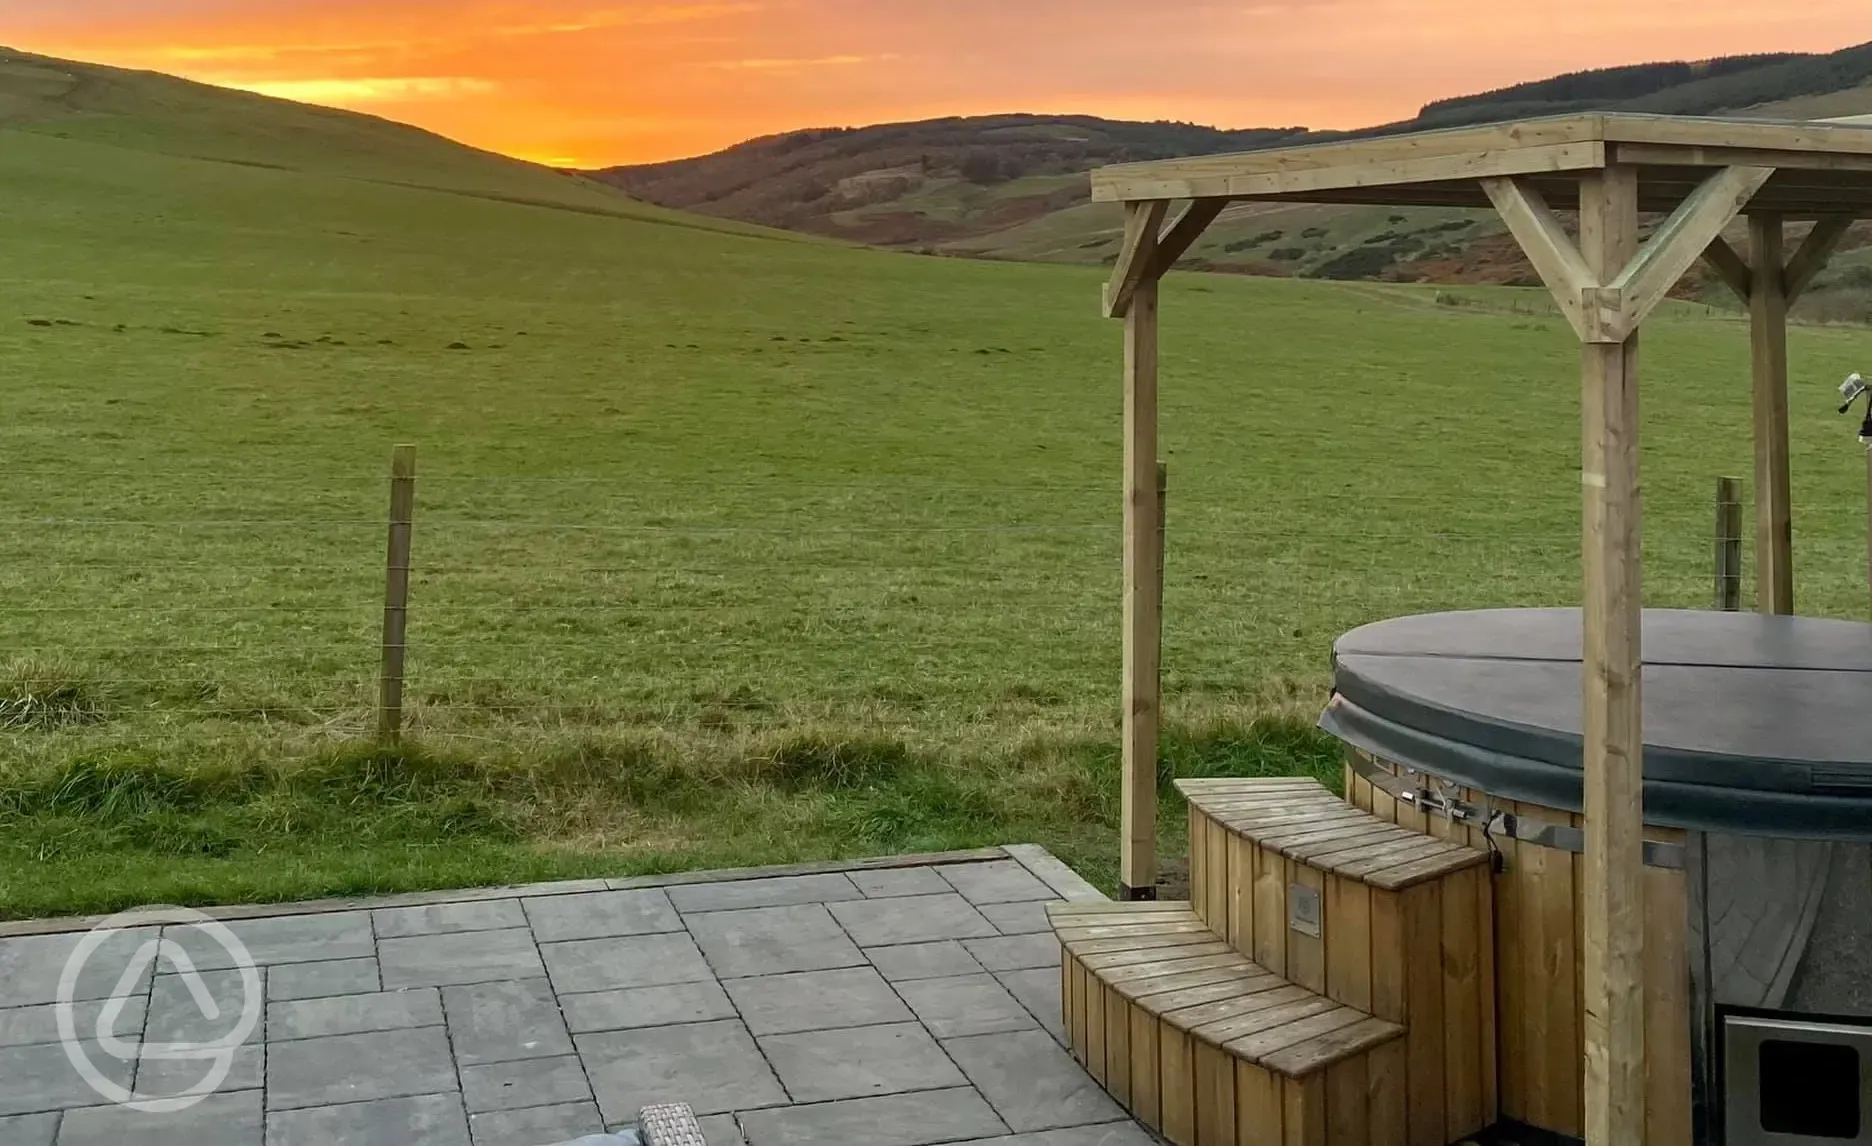 White Clover Wood-fired Hot Tub